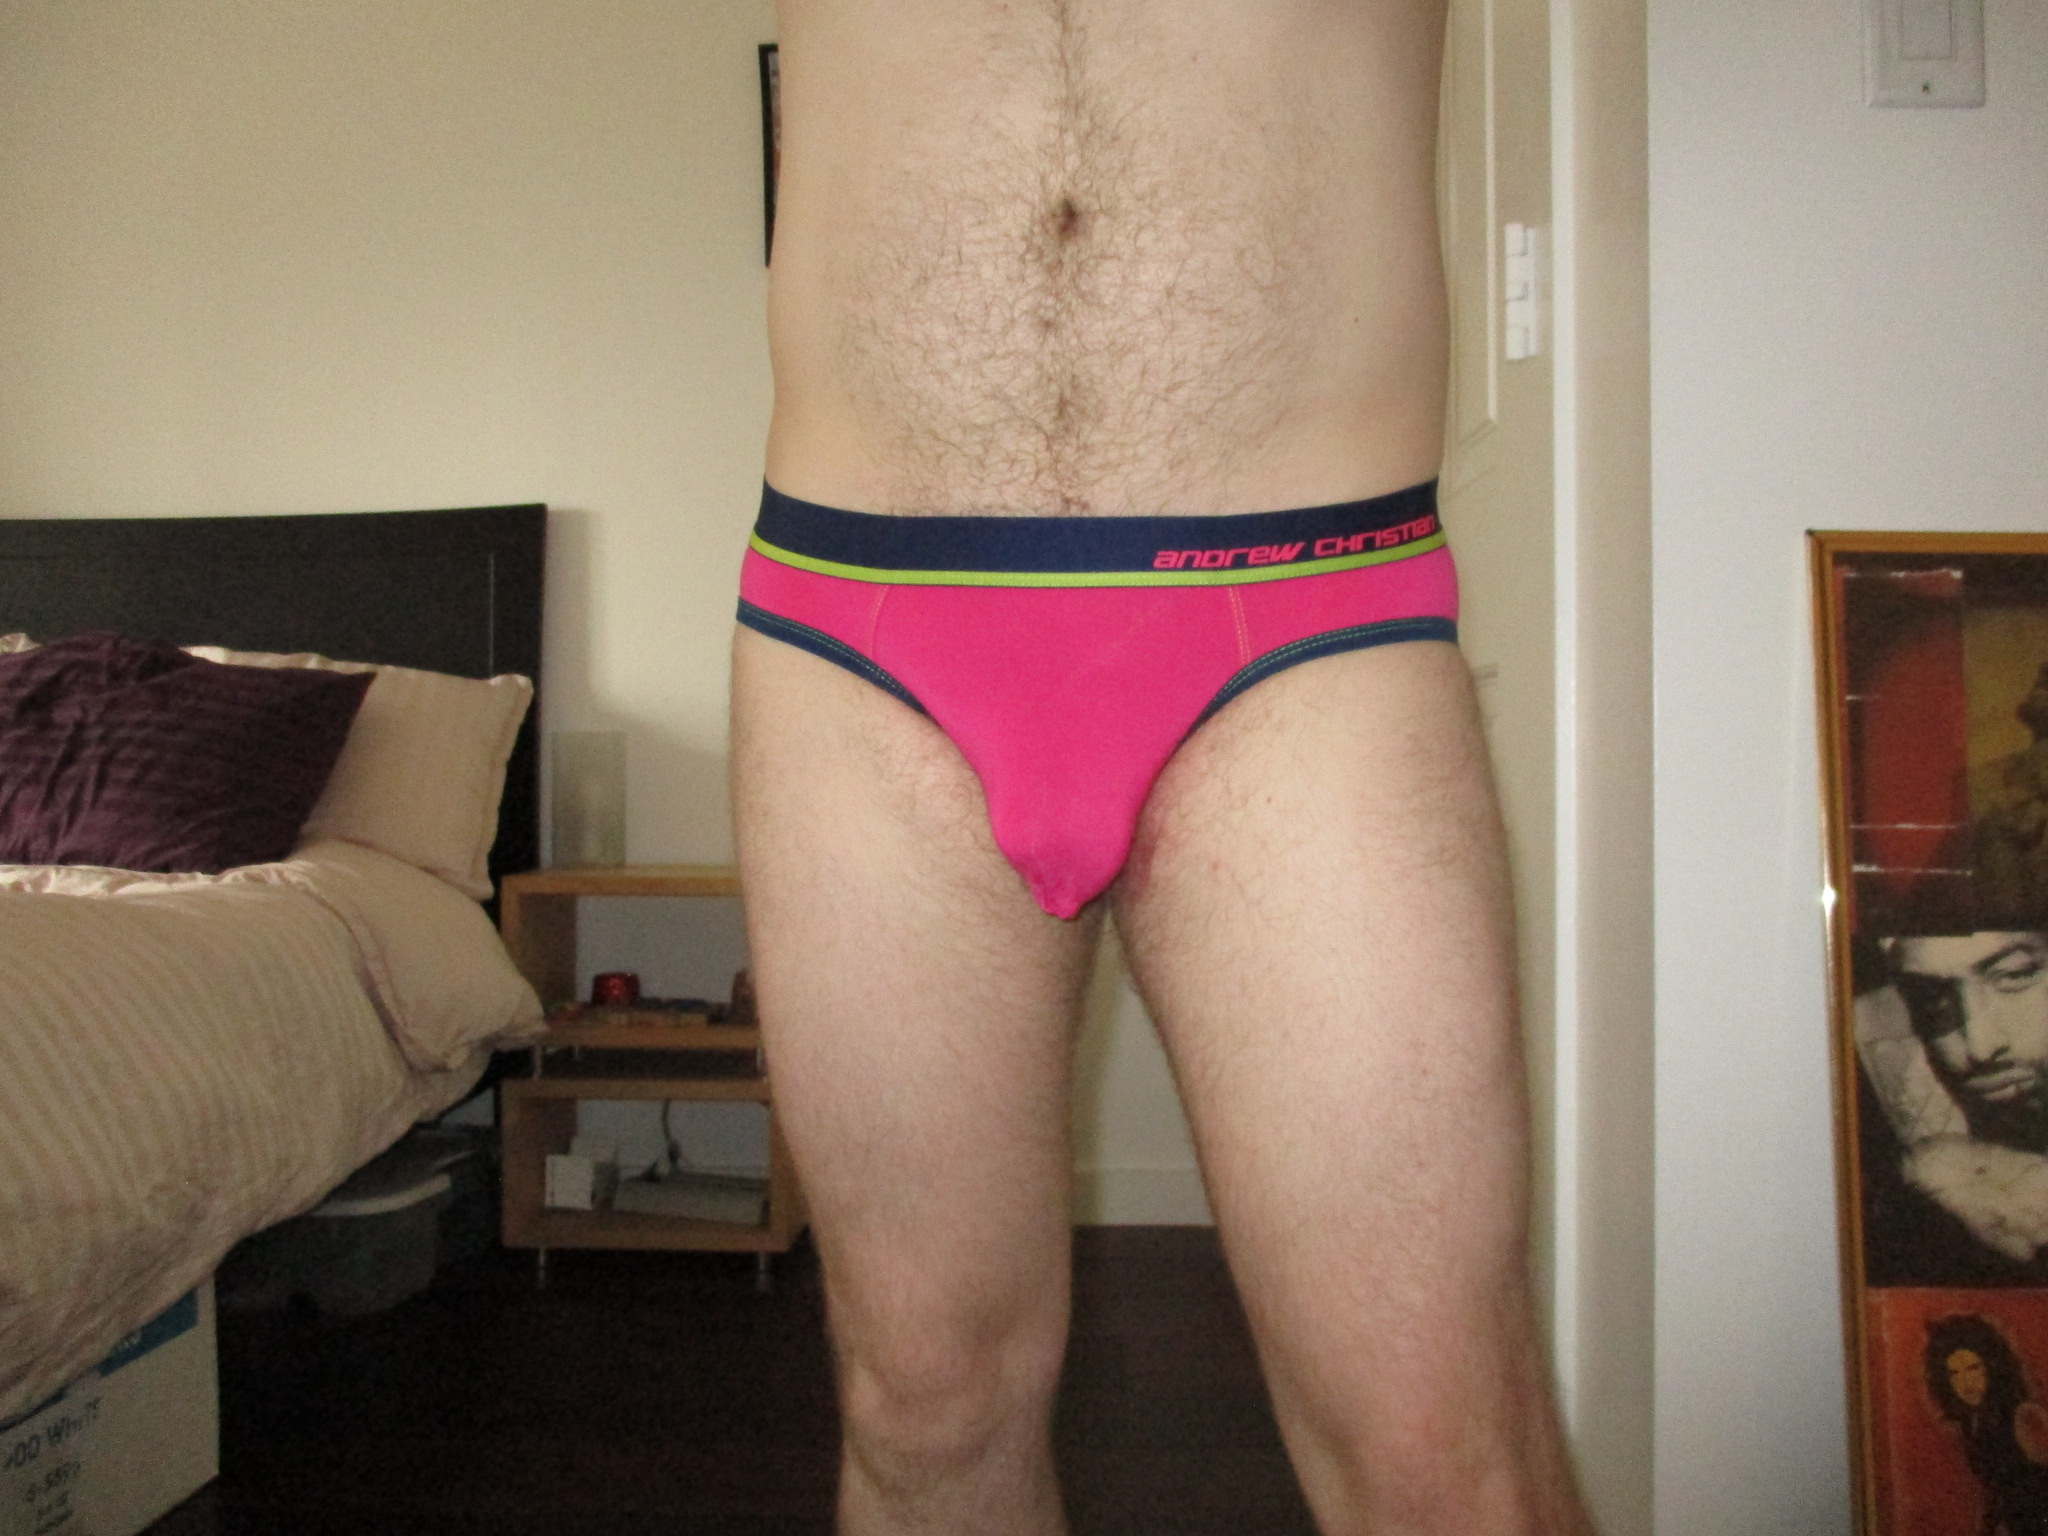 A new day has come…a new day for Undies101…